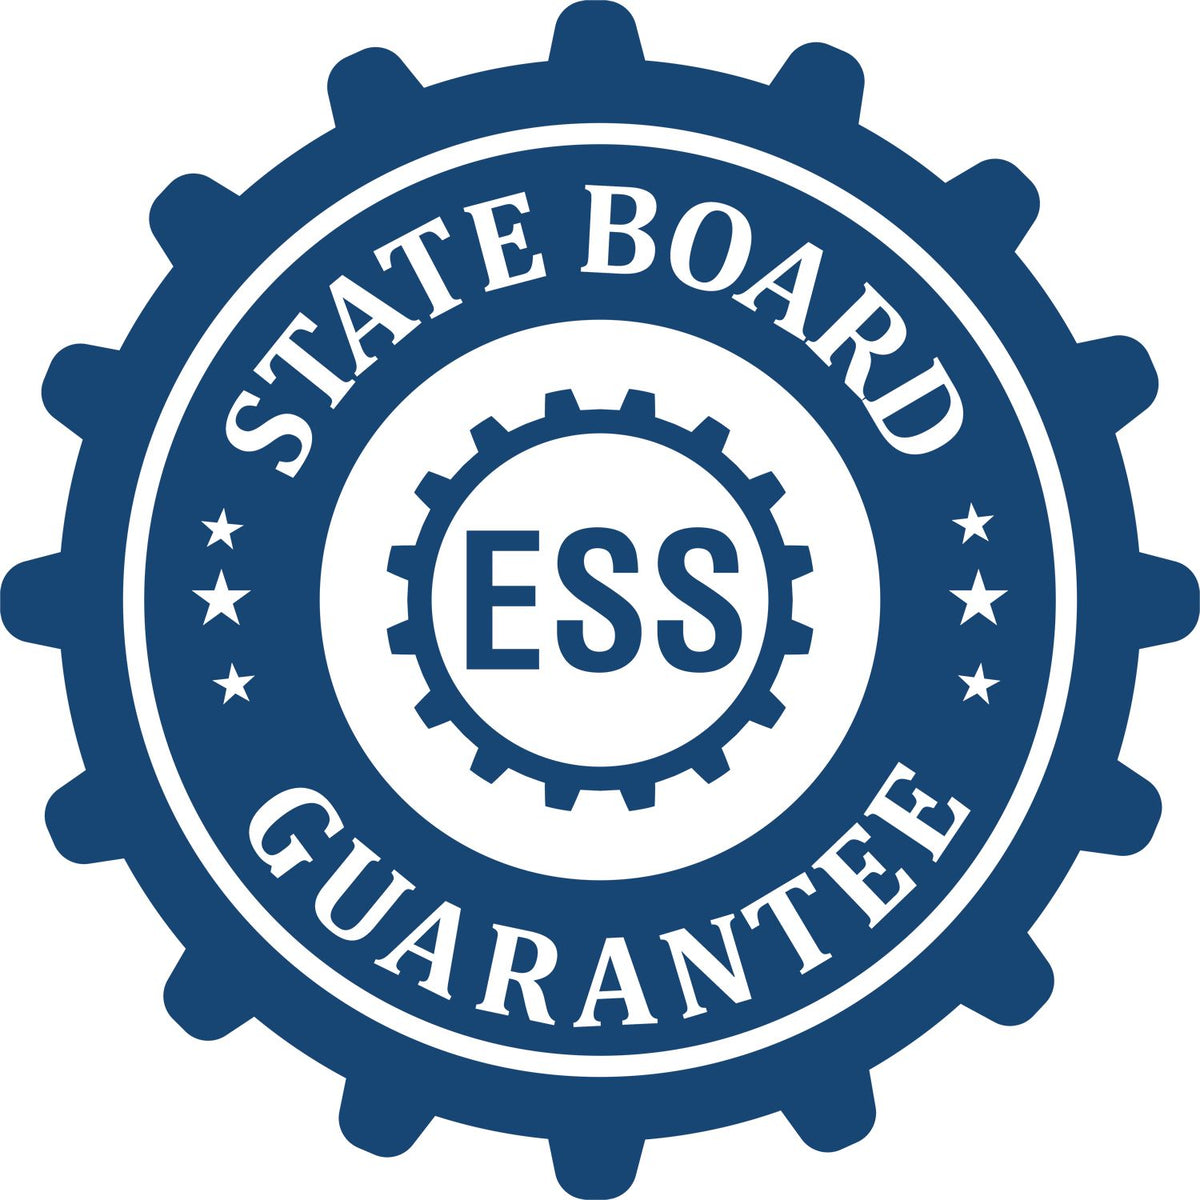 An emblem in a gear shape illustrating a state board guarantee for the Handheld Missouri Land Surveyor Seal product.